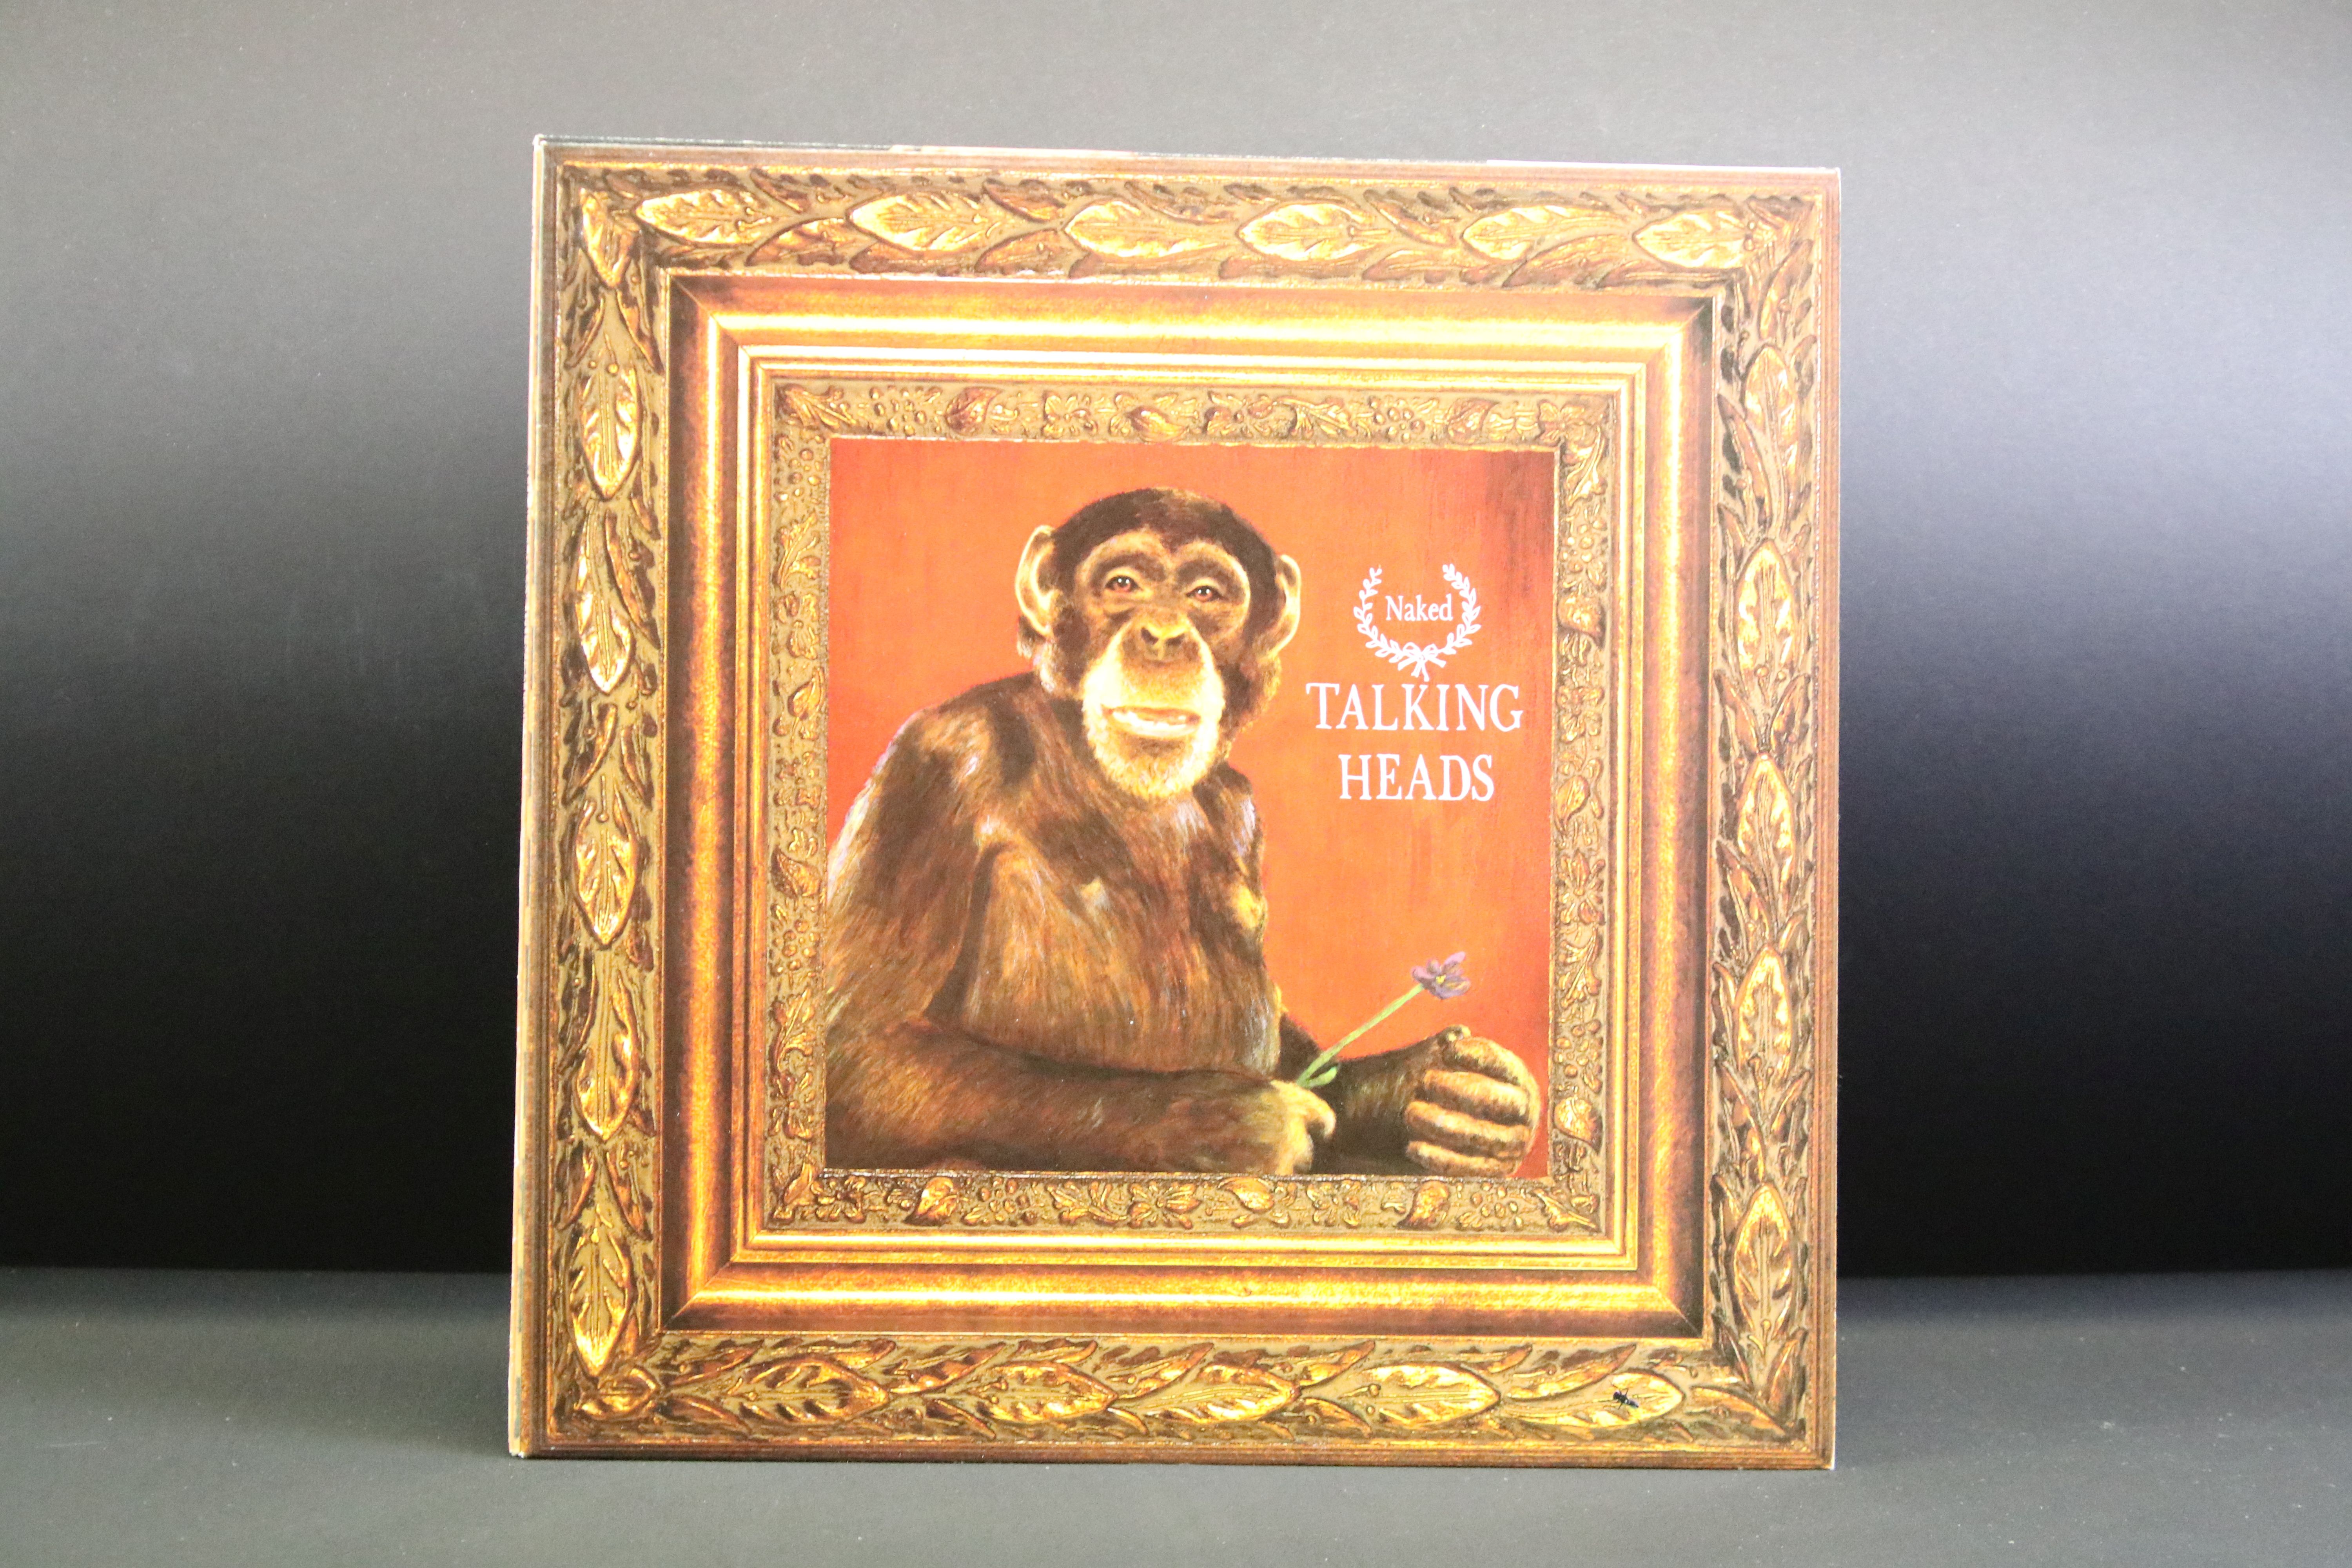 Vinyl - 6 Talking Heads LPs to include Little Creatures, Naked, Stop Making Sense, Fear Of Music and - Image 4 of 7